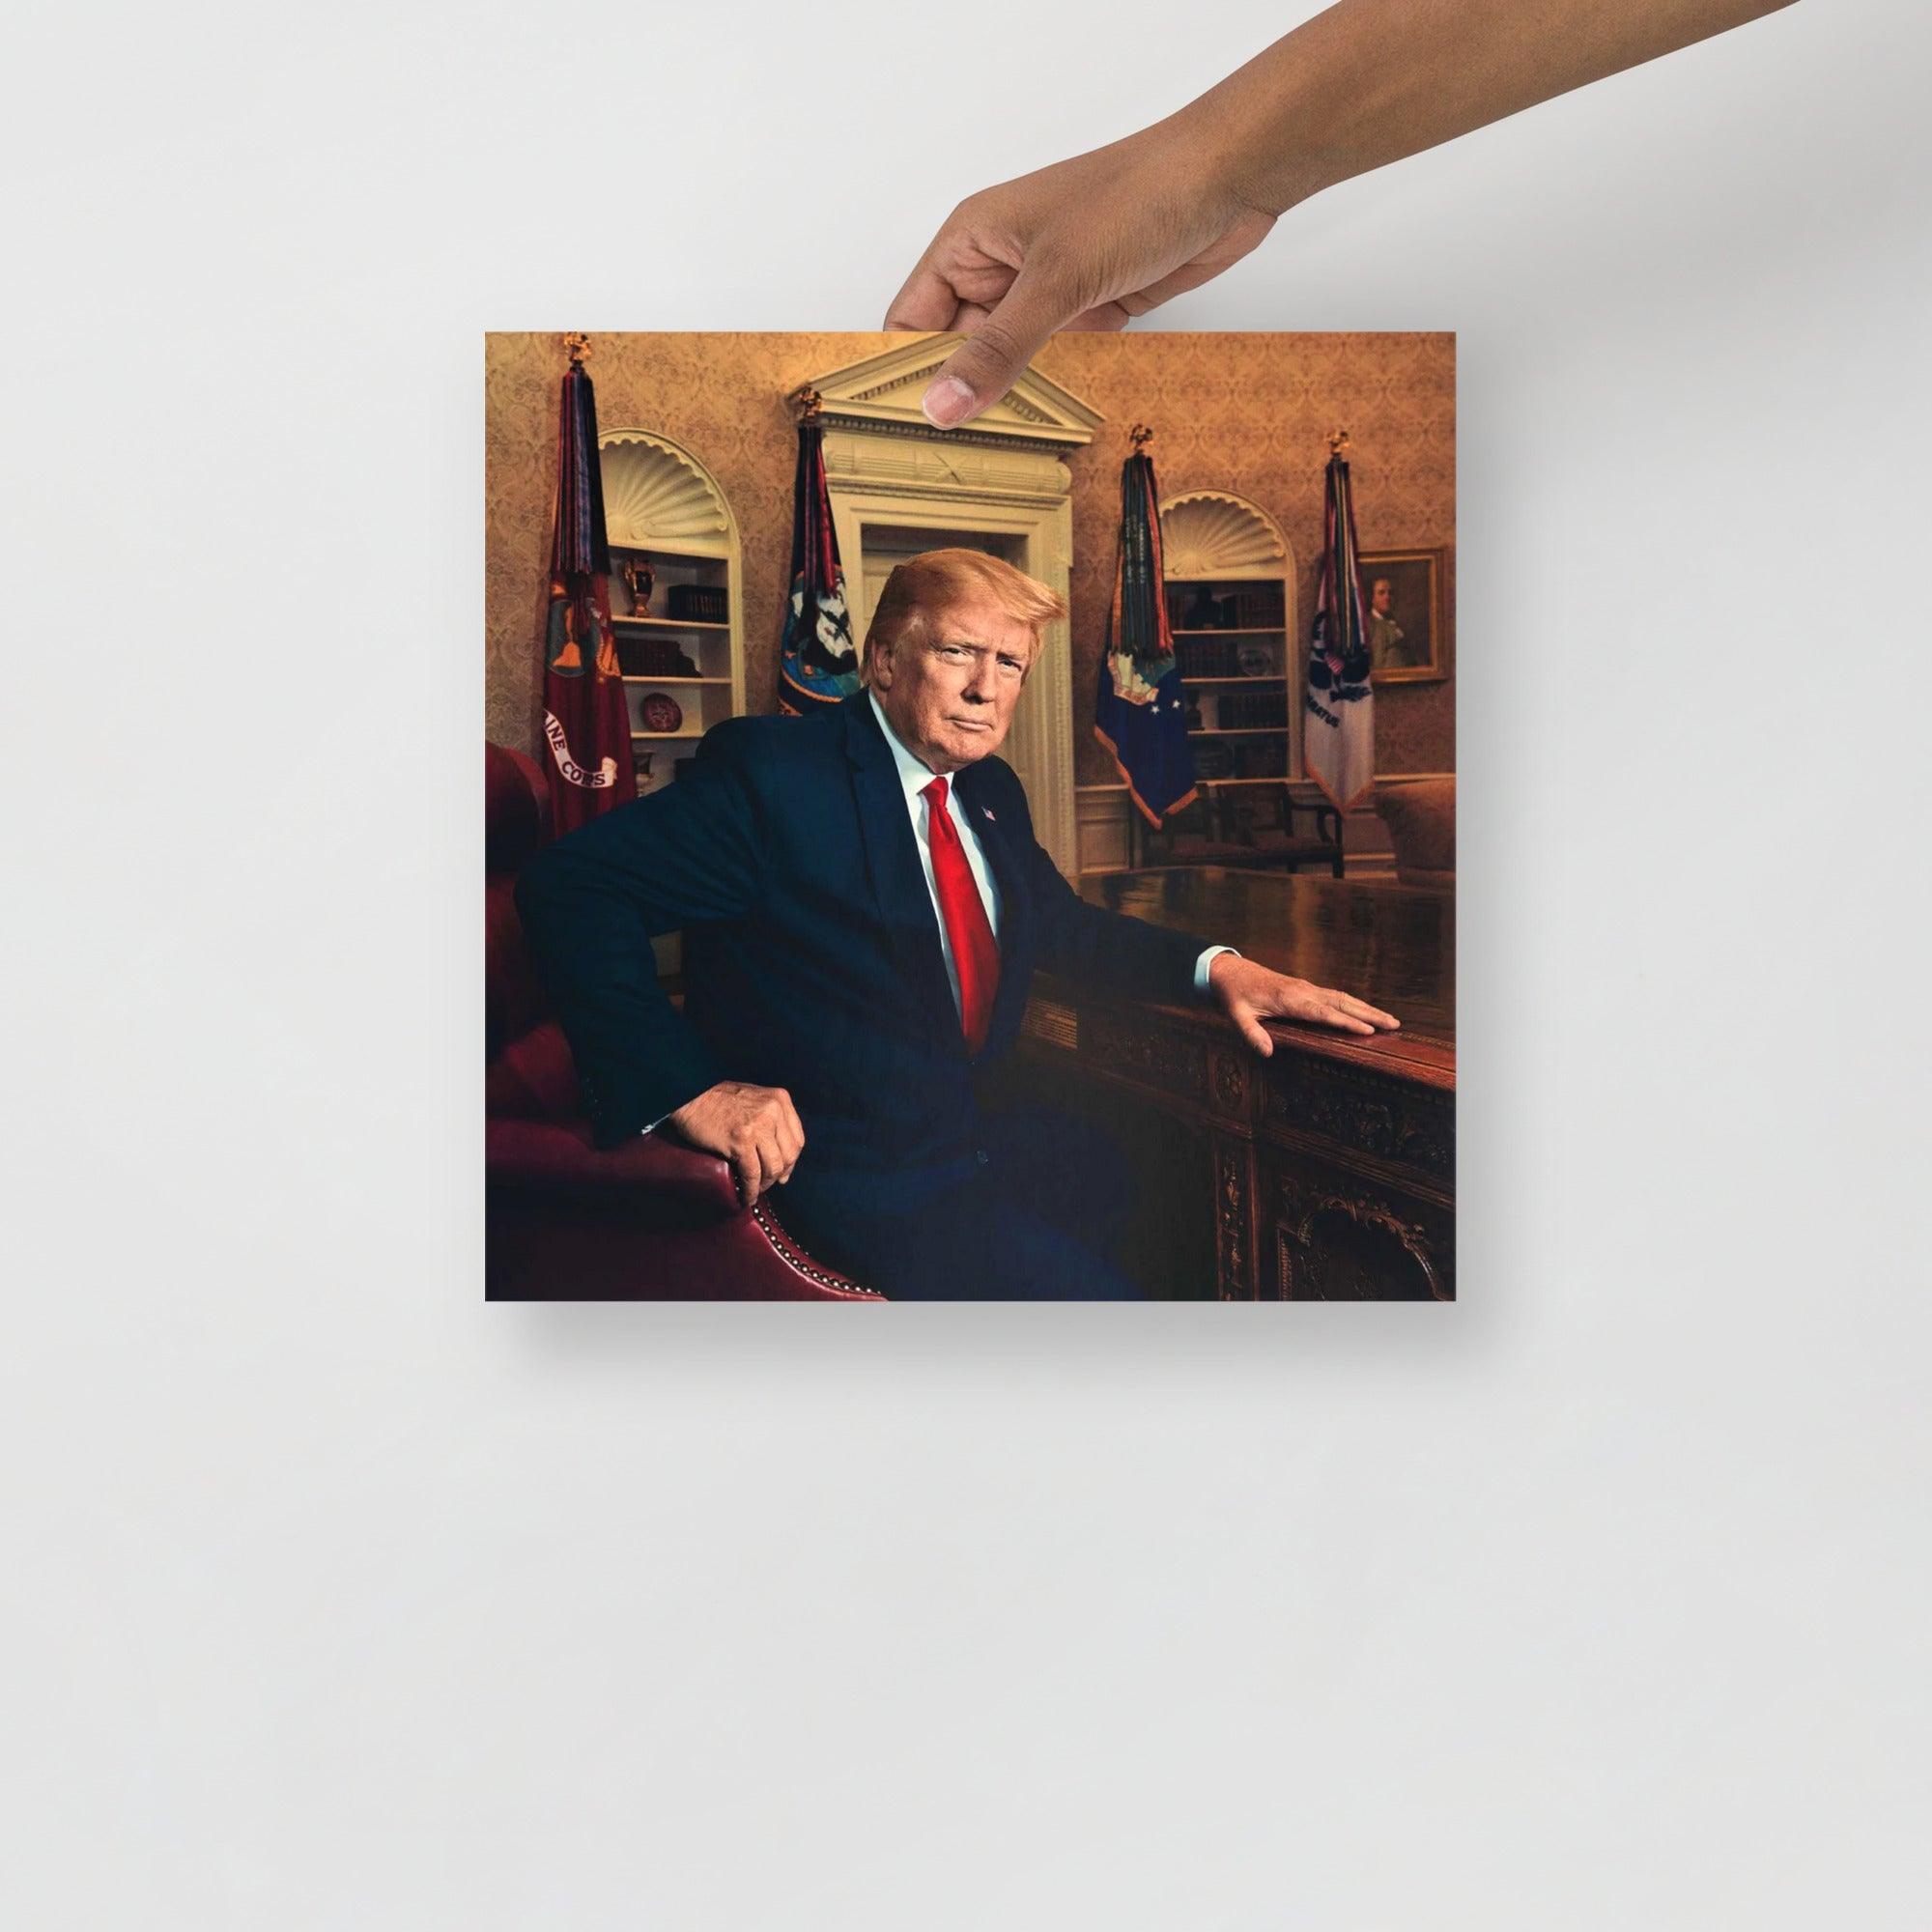 A Donald Trump at the Oval Office poster on a plain backdrop in size 14x14”.